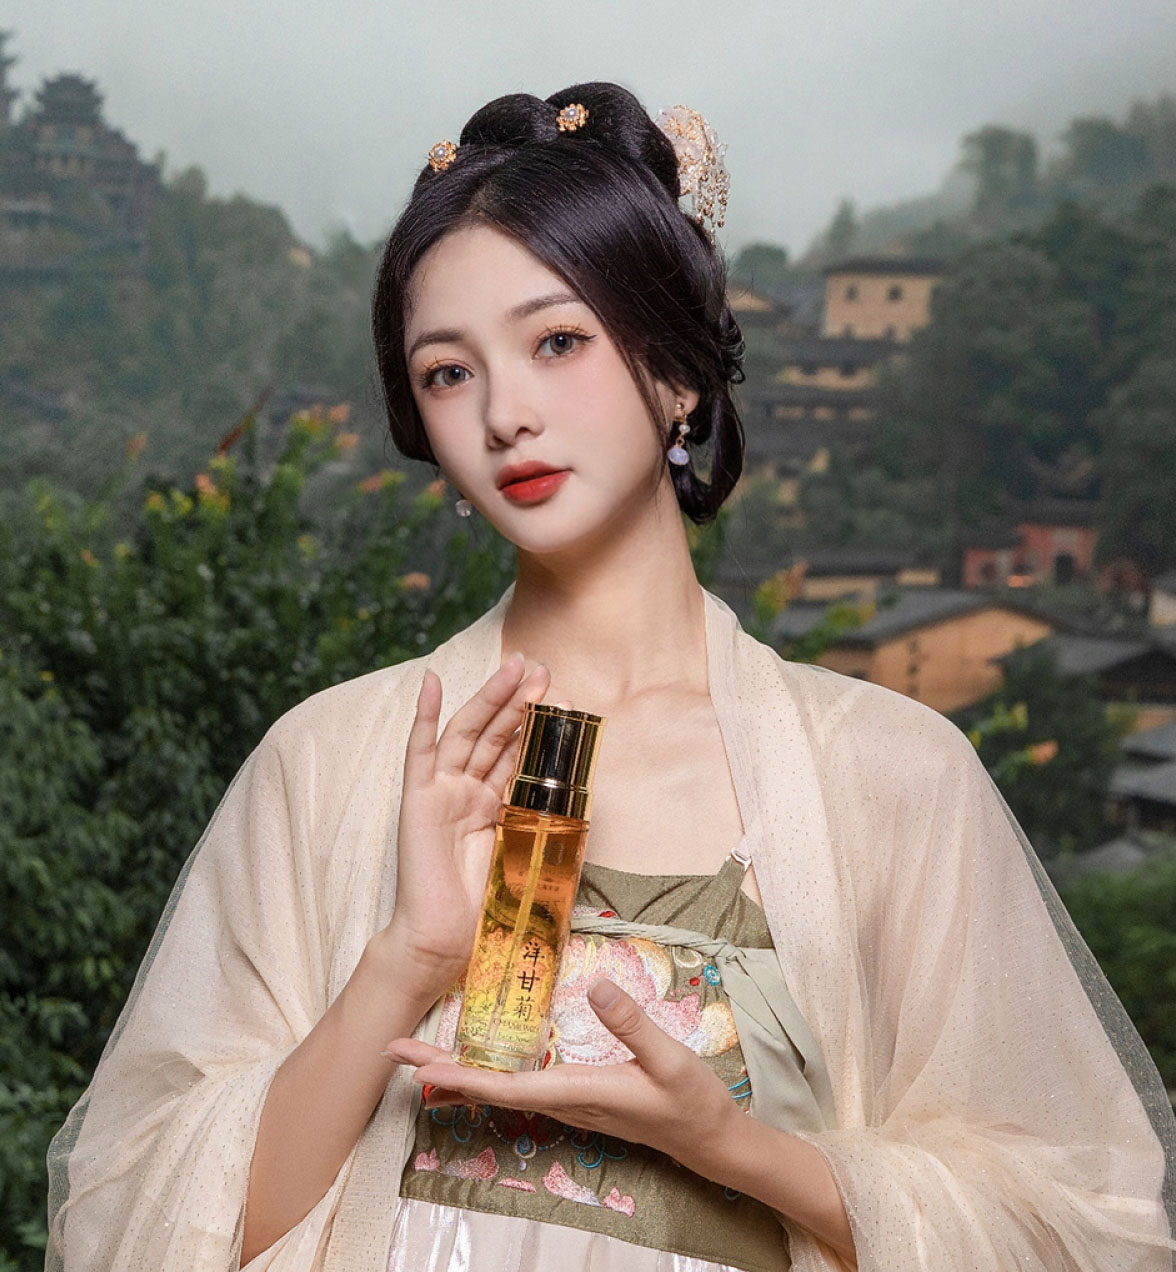 Chinese woman with ShanghaiSong skin care